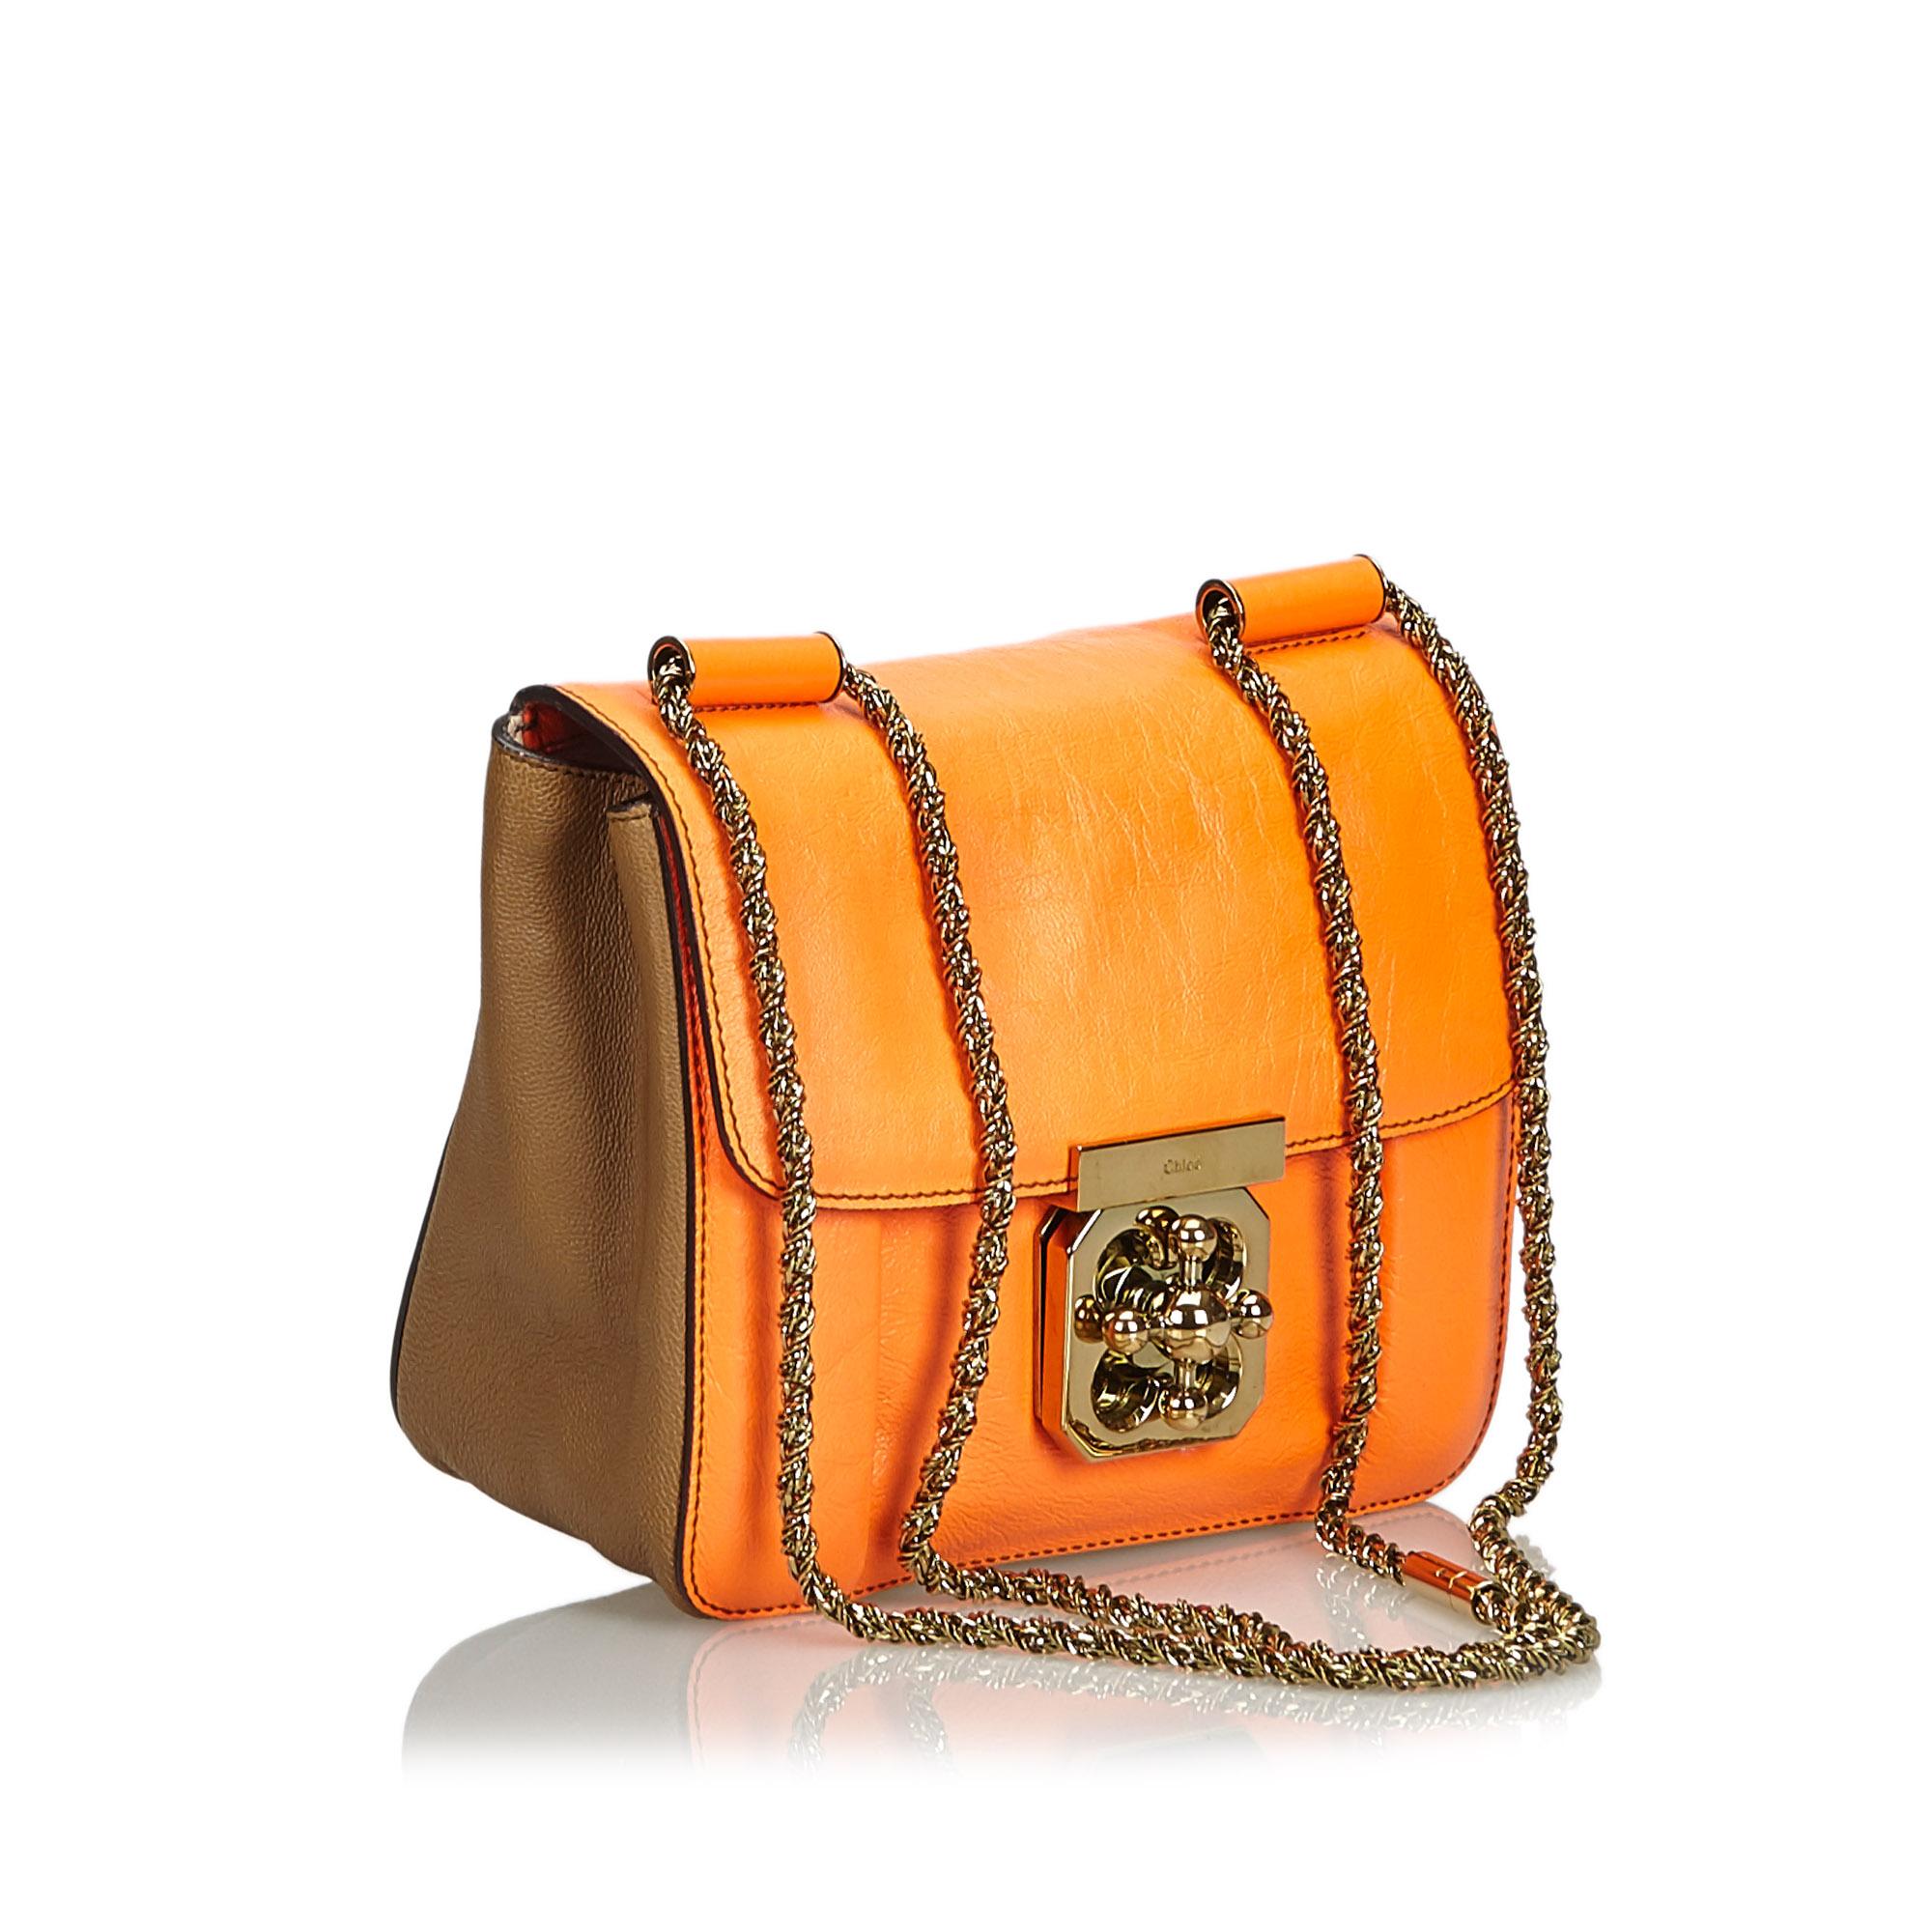 The Elsie crossbody bag features a leather body, chain link straps, a top flap with a twist lock closure, and an interior slip pocket. It carries as B+ condition rating.

Inclusions: 
Dust Bag
Authenticity Card

Dimensions:
Length: 17.00 cm
Width: